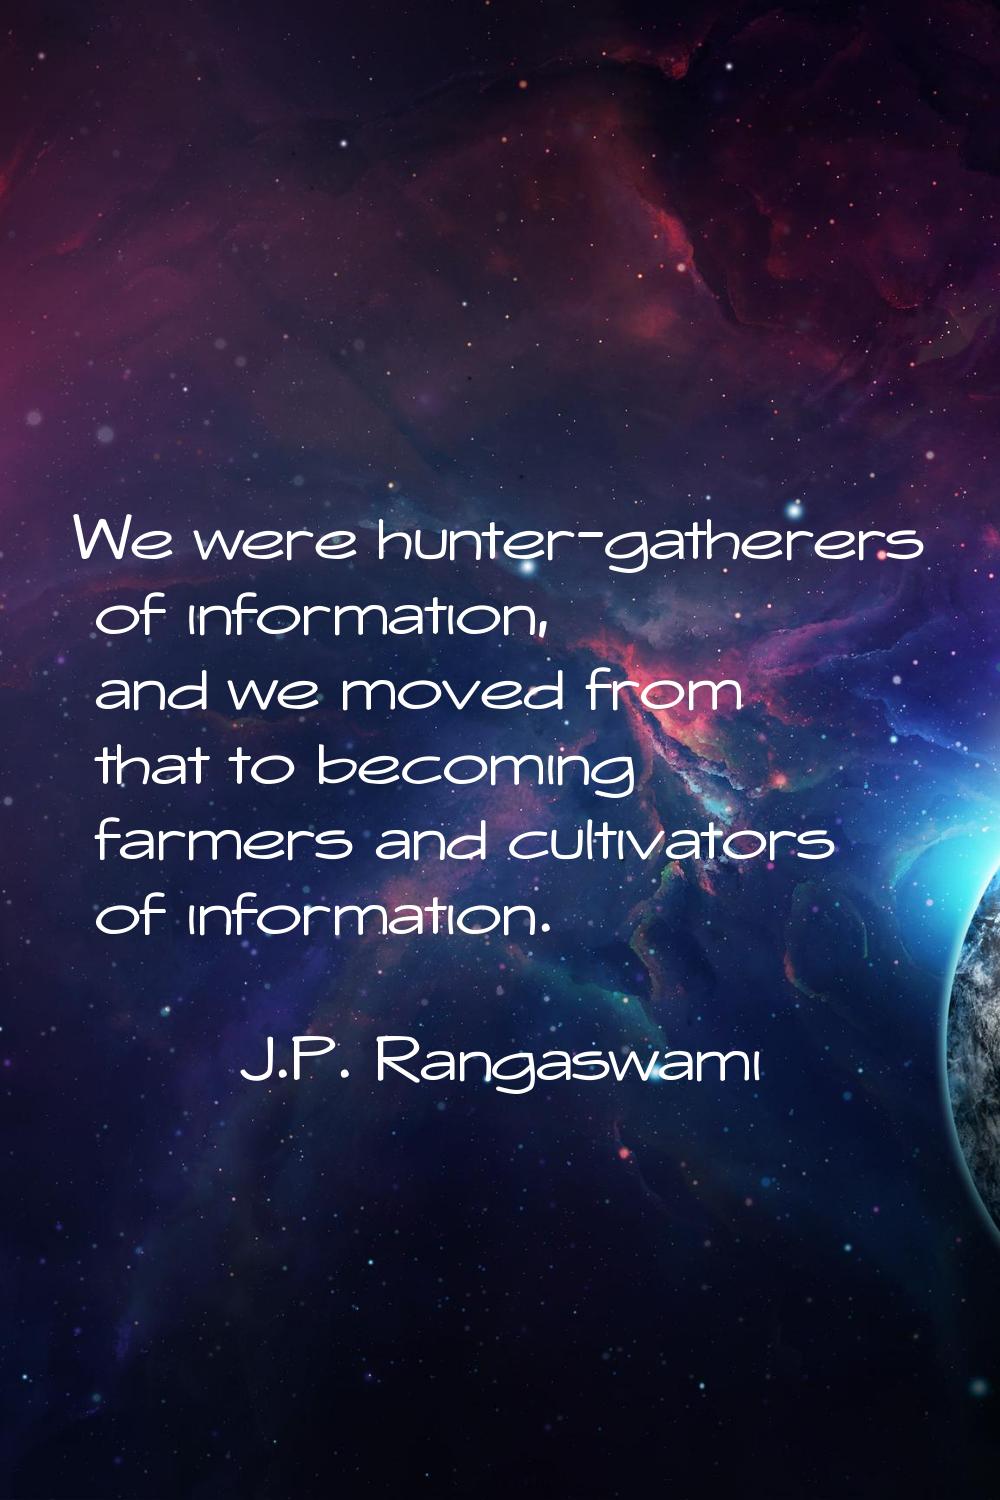 We were hunter-gatherers of information, and we moved from that to becoming farmers and cultivators